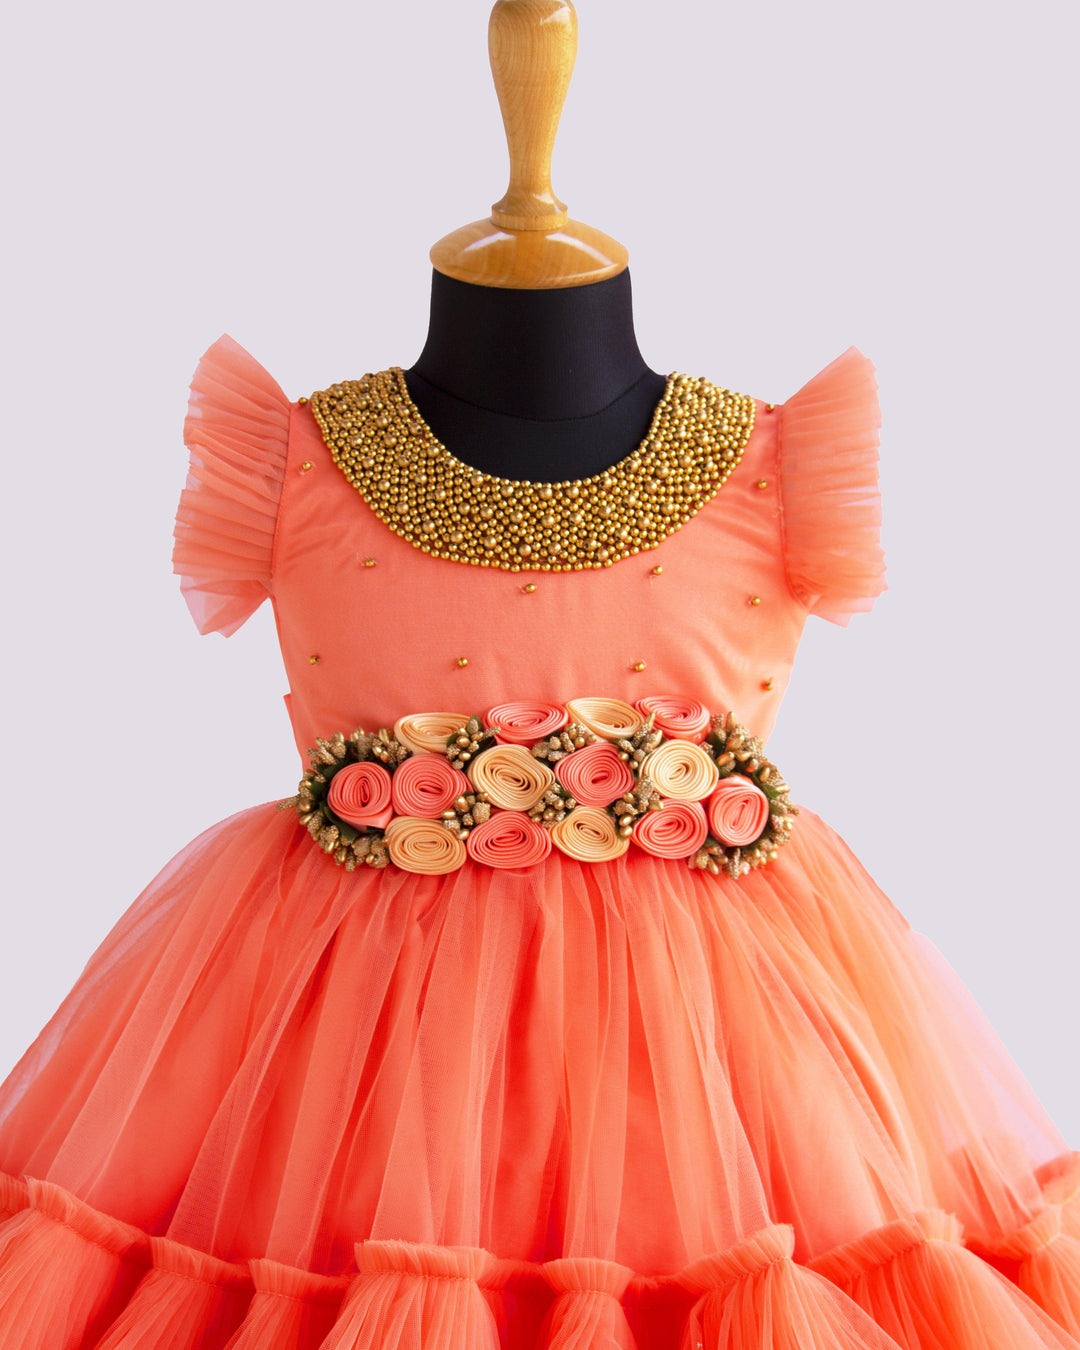 Coral Peach Shade Handwork Flower Frock
Material: Coral peach shade handwork flower frock is made with soft nylon net fabric. The yoke portion of the frock is designed with handwork design. Golden colour 